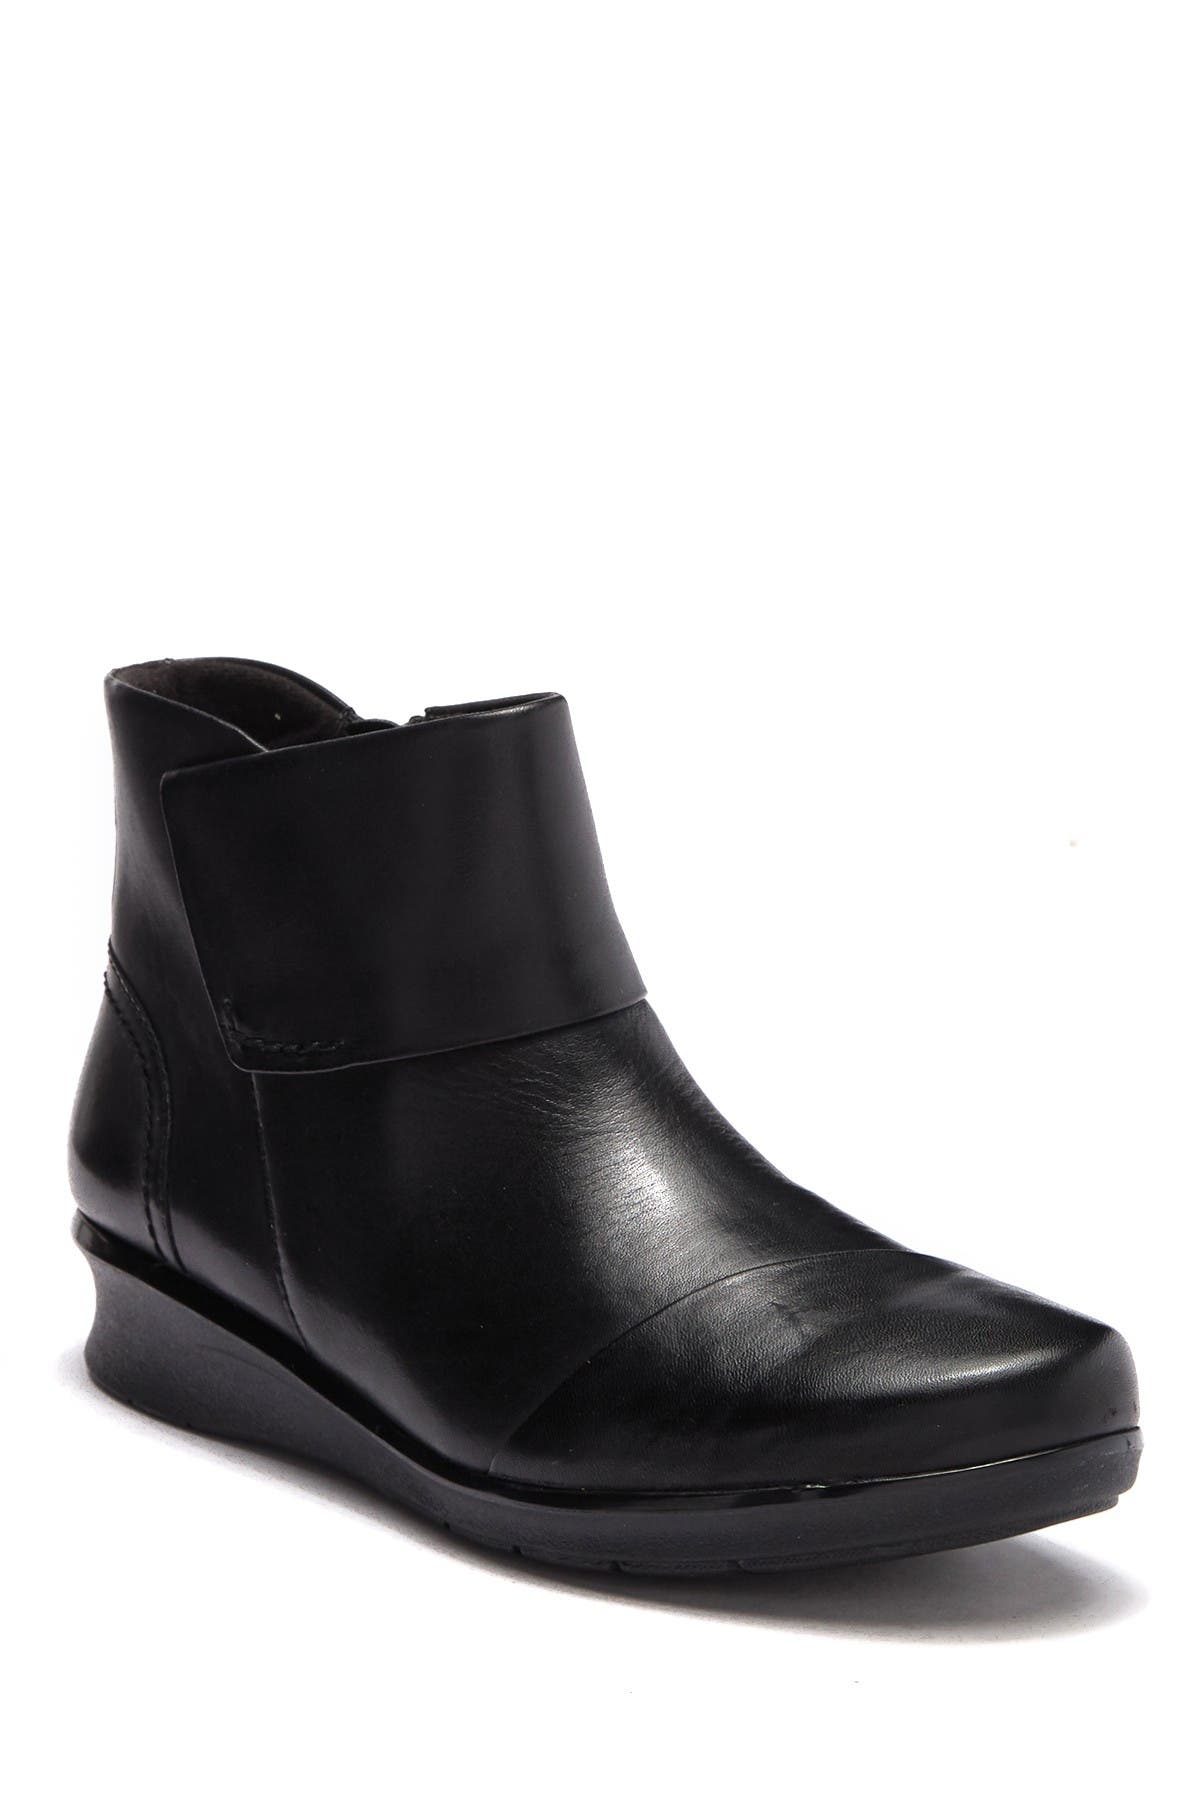 clarks hope track ankle boot